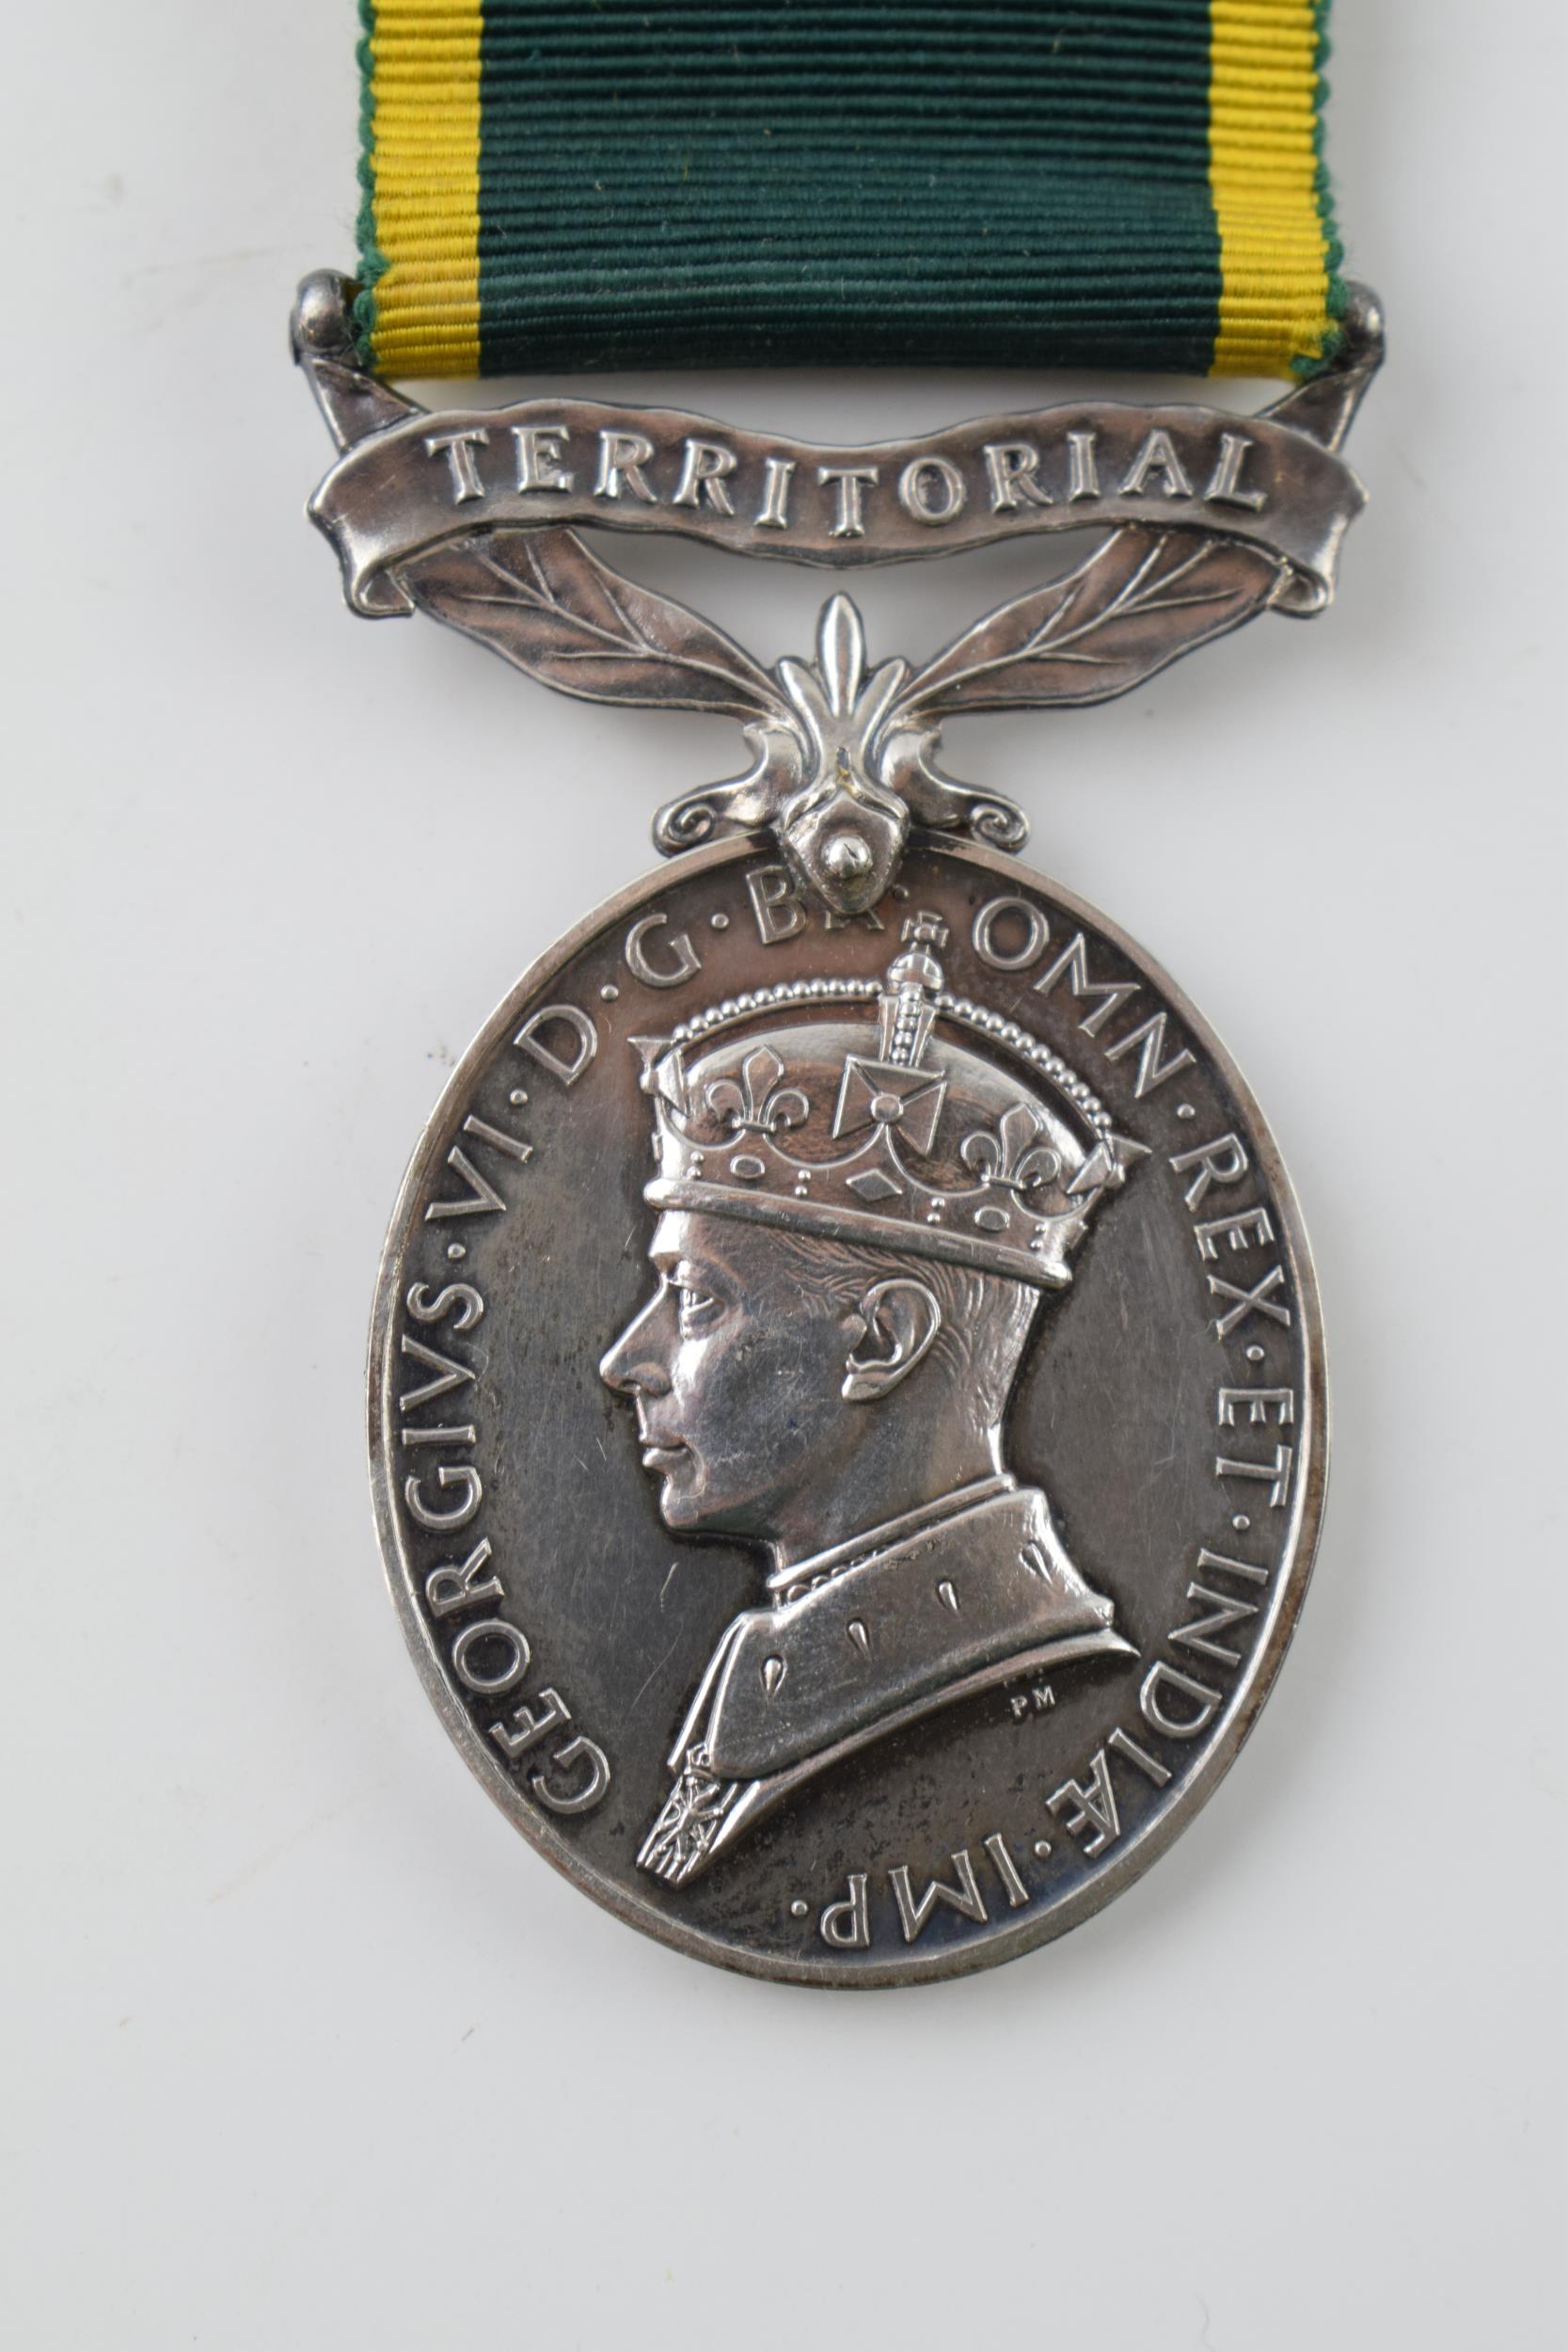 George VI Territorial medal 'For Efficient Service" awarded to 753760 CRMN. H . ASSHETON. R. E. M. - Image 2 of 5